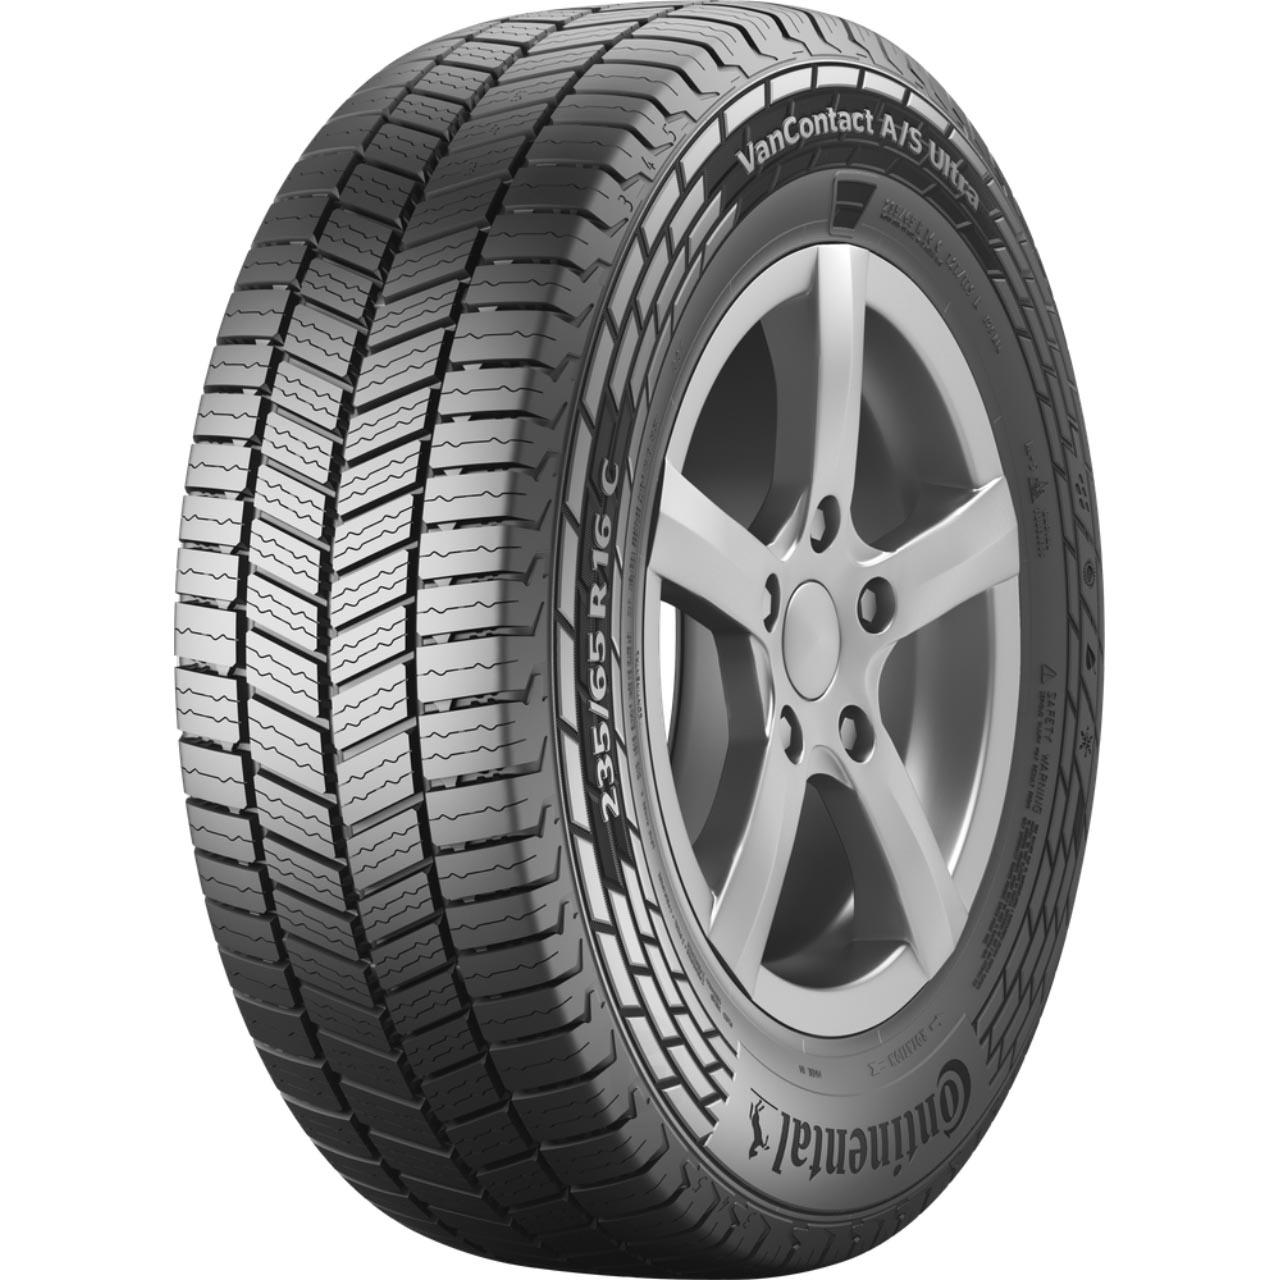 Continental VANCONTACT AS ULTRA 225/75R16C 121/120R